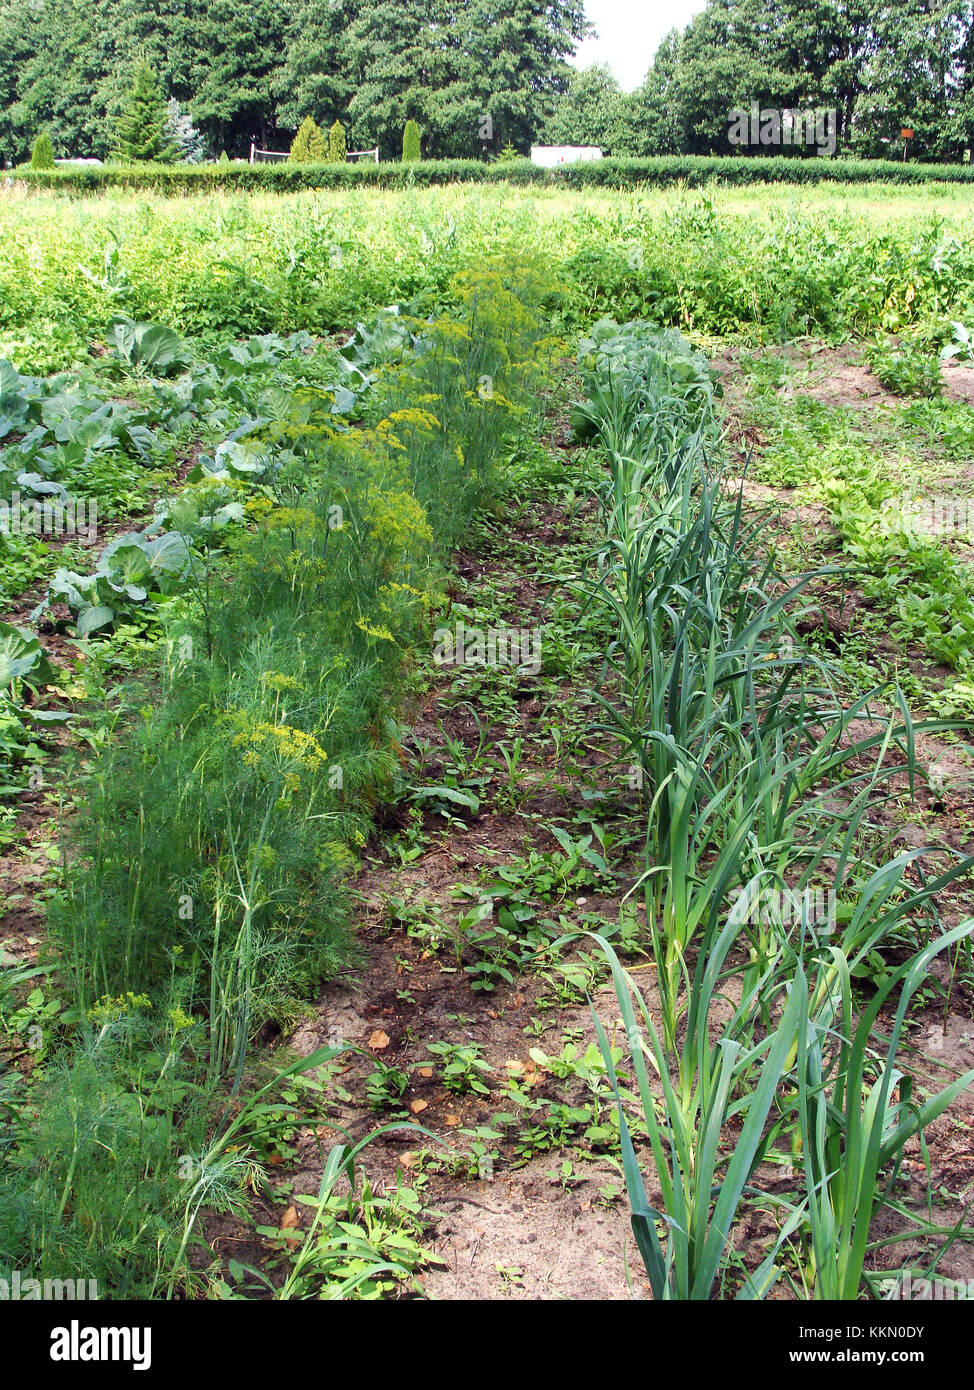 Furrows of dill and leek growing in vegetable garden concept of organic biological farming Stock Photo